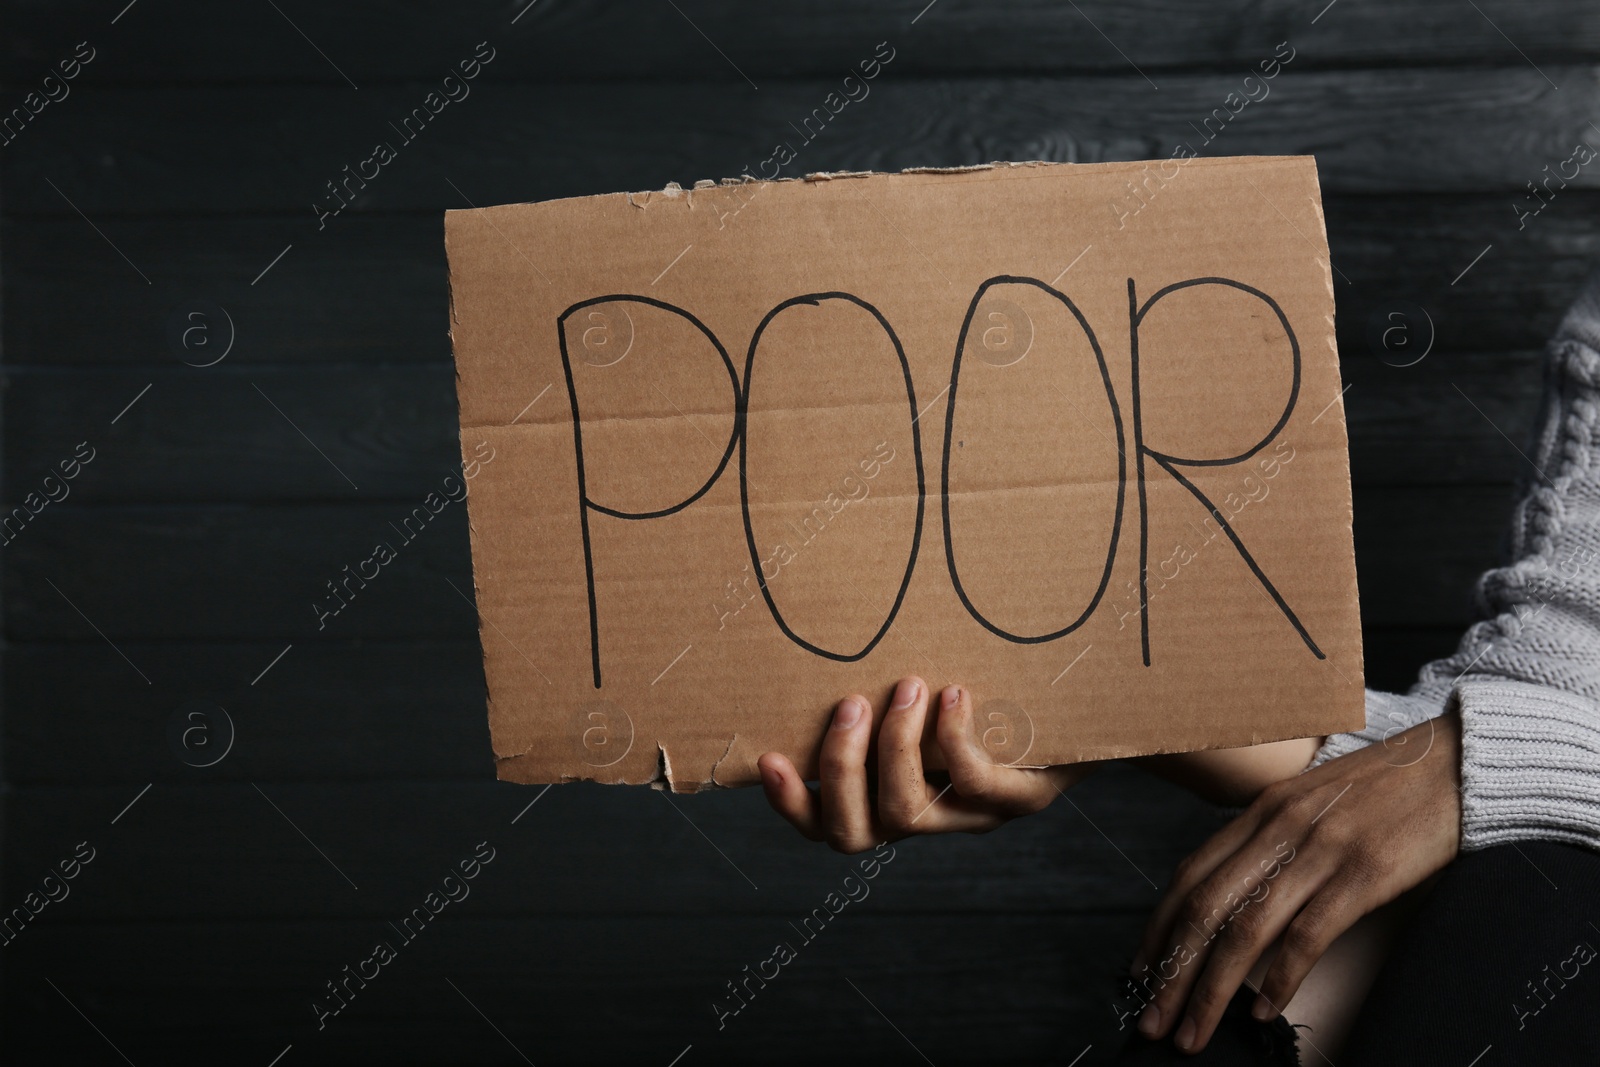 Photo of Woman holding cardboard sign with word "POOR" on wooden background, closeup